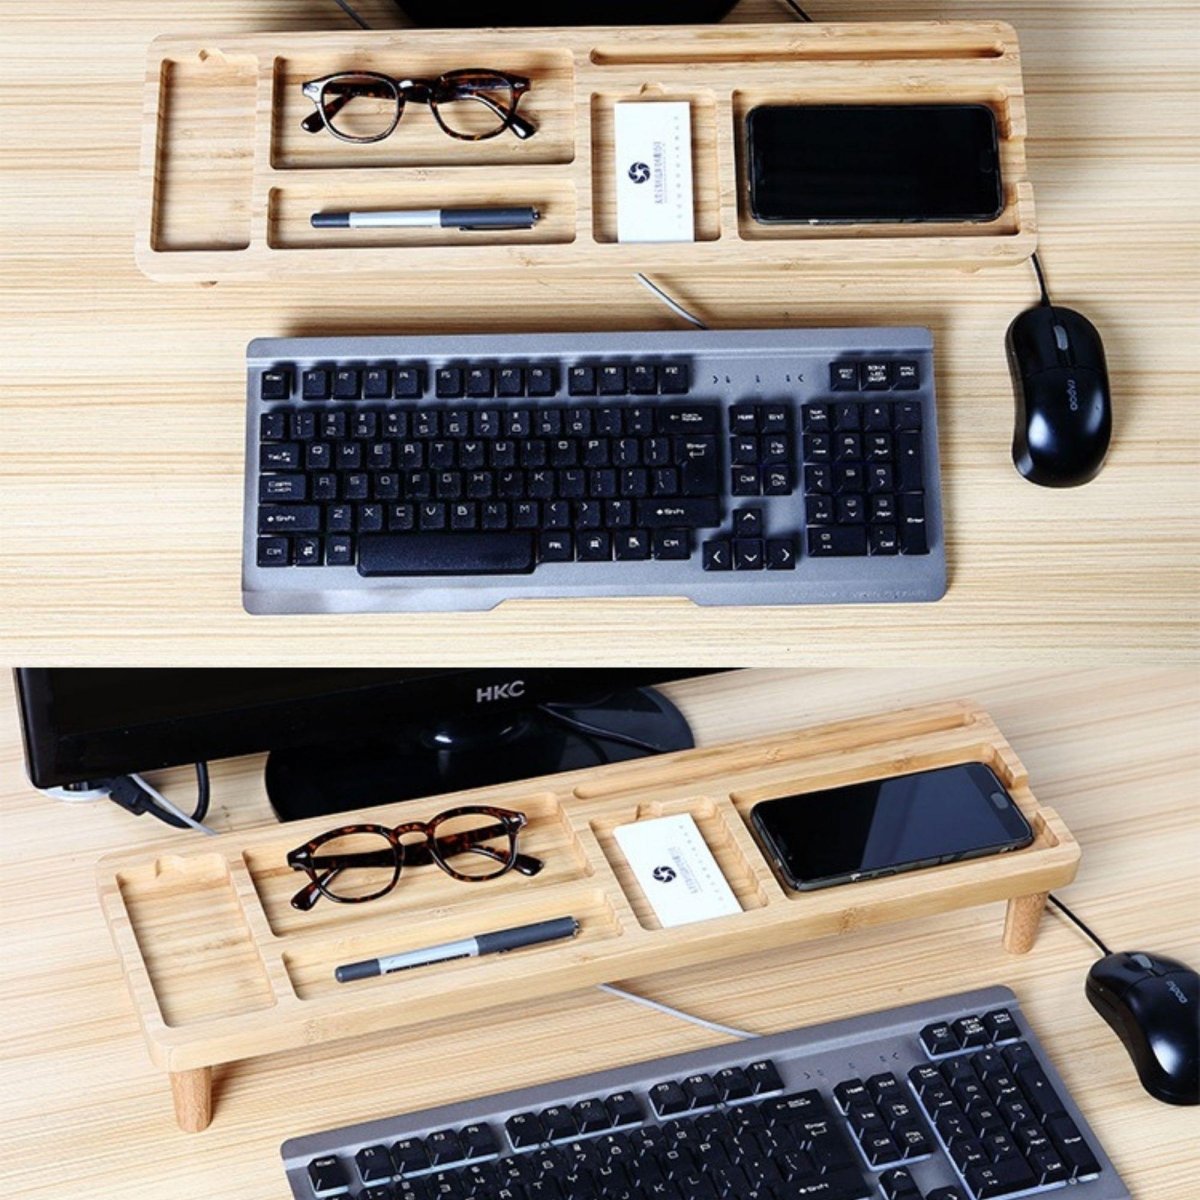 Bamboo Stand Organizer for Desk - iWoodStore